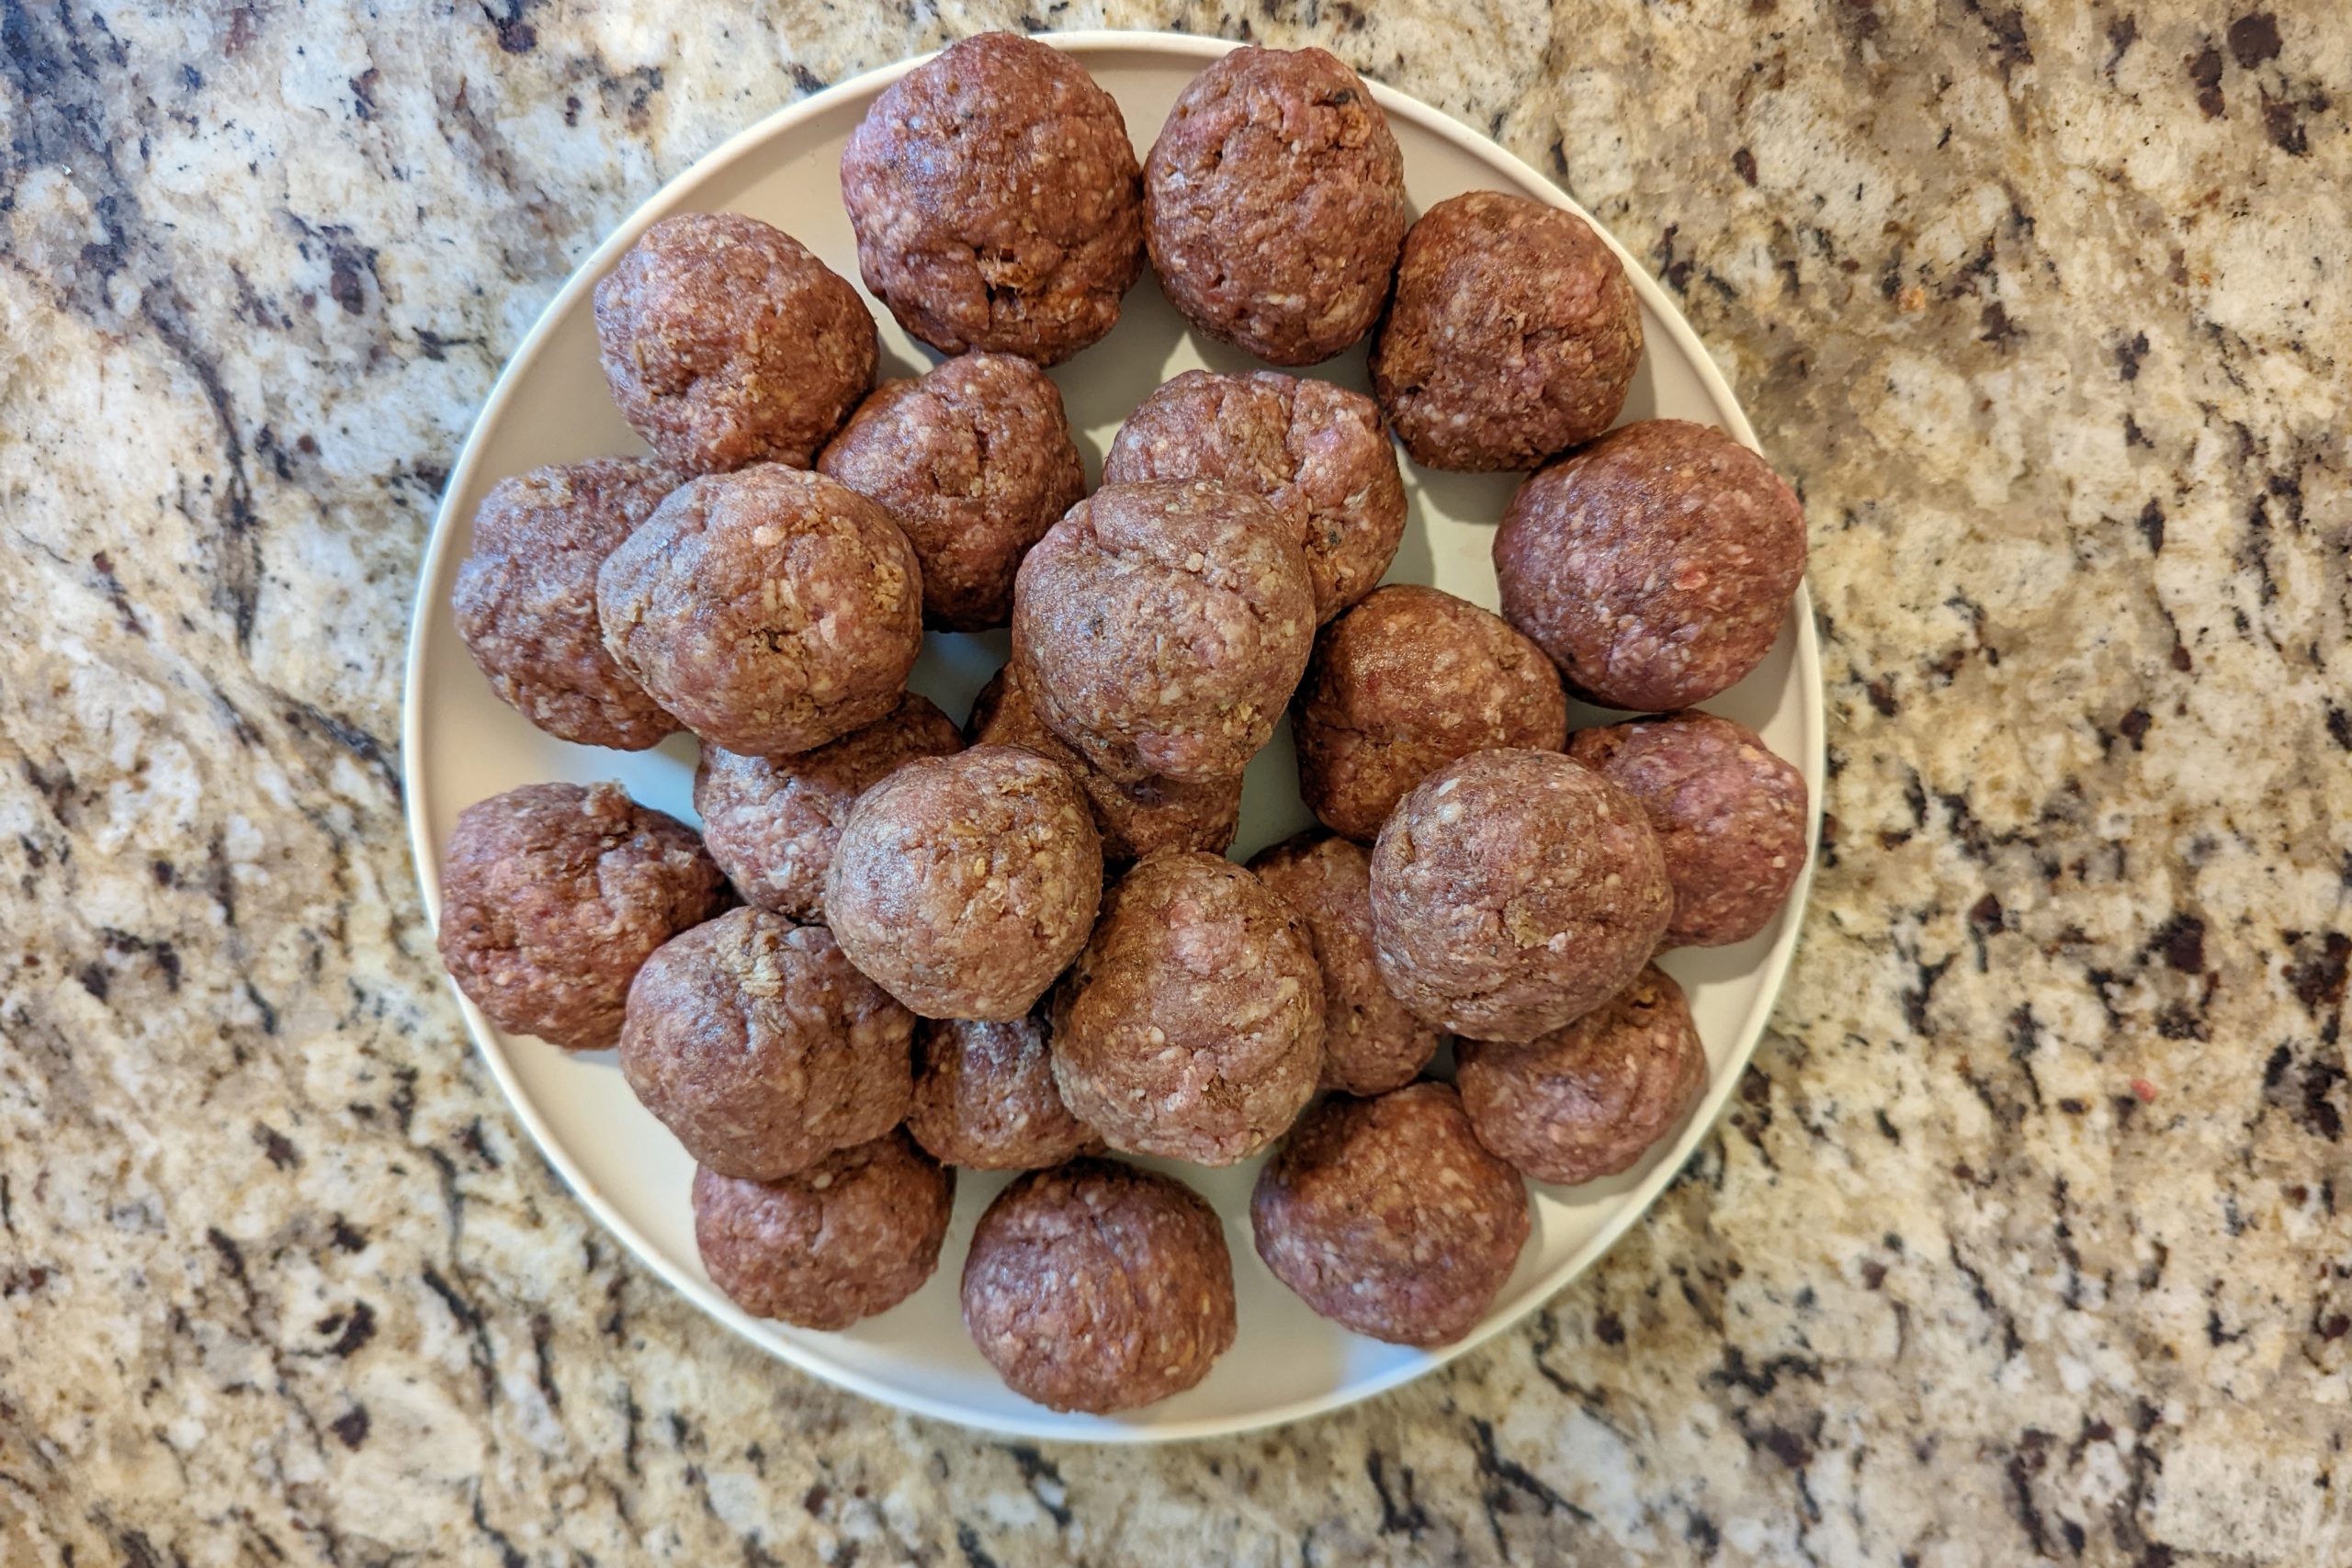 rolled the beef mixture into 1 inch meatballs